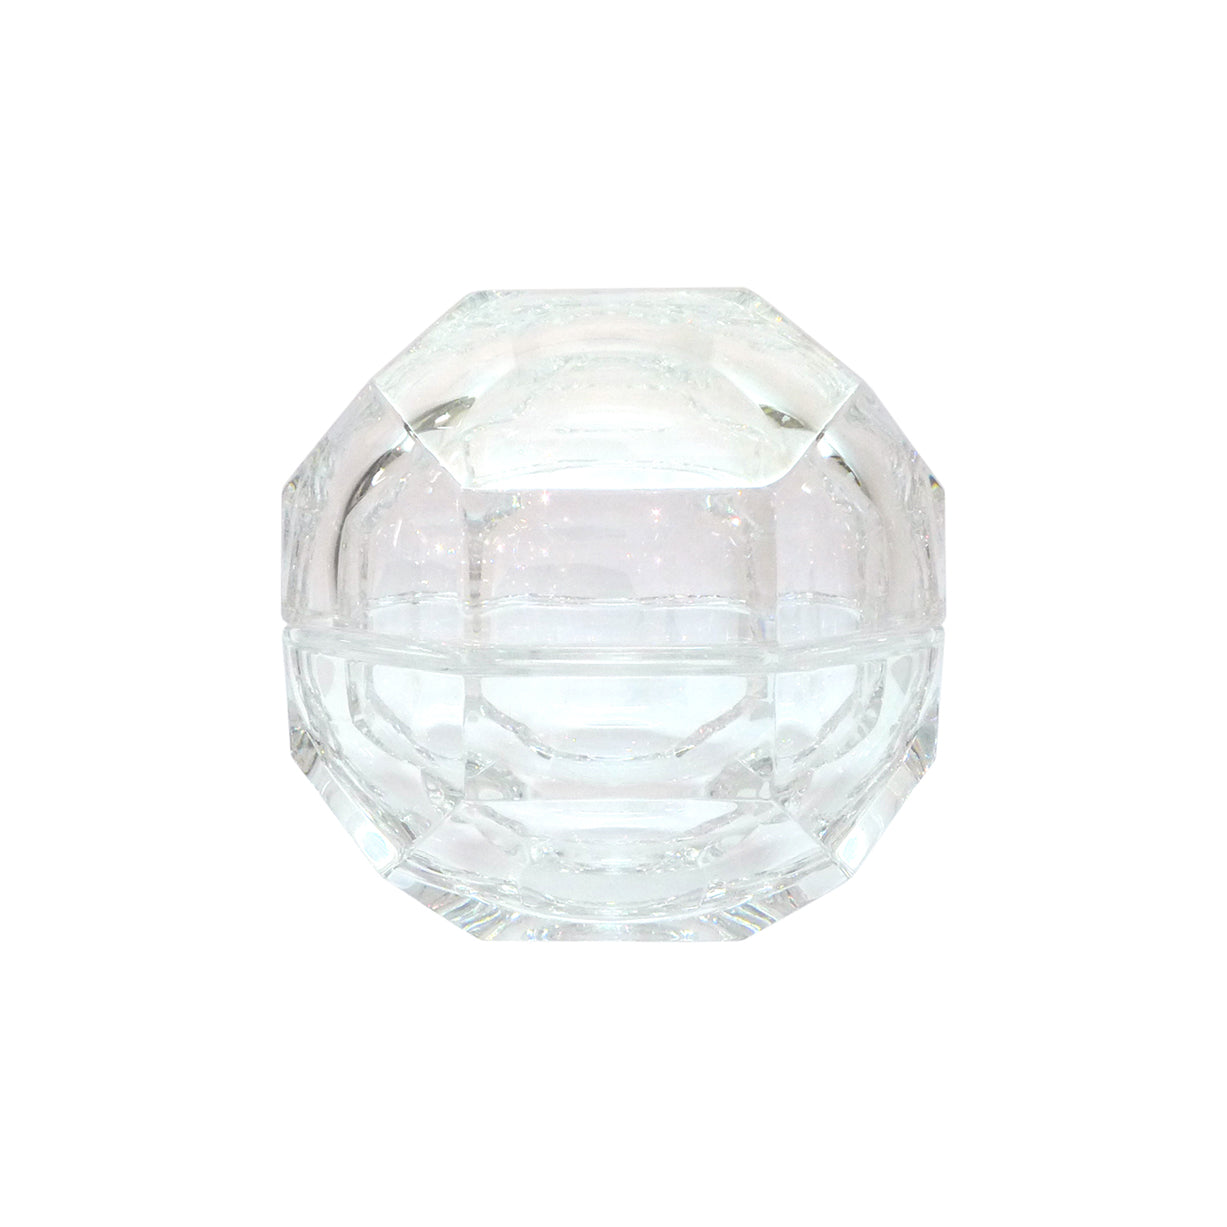 Faceted Crystal Lidded Box